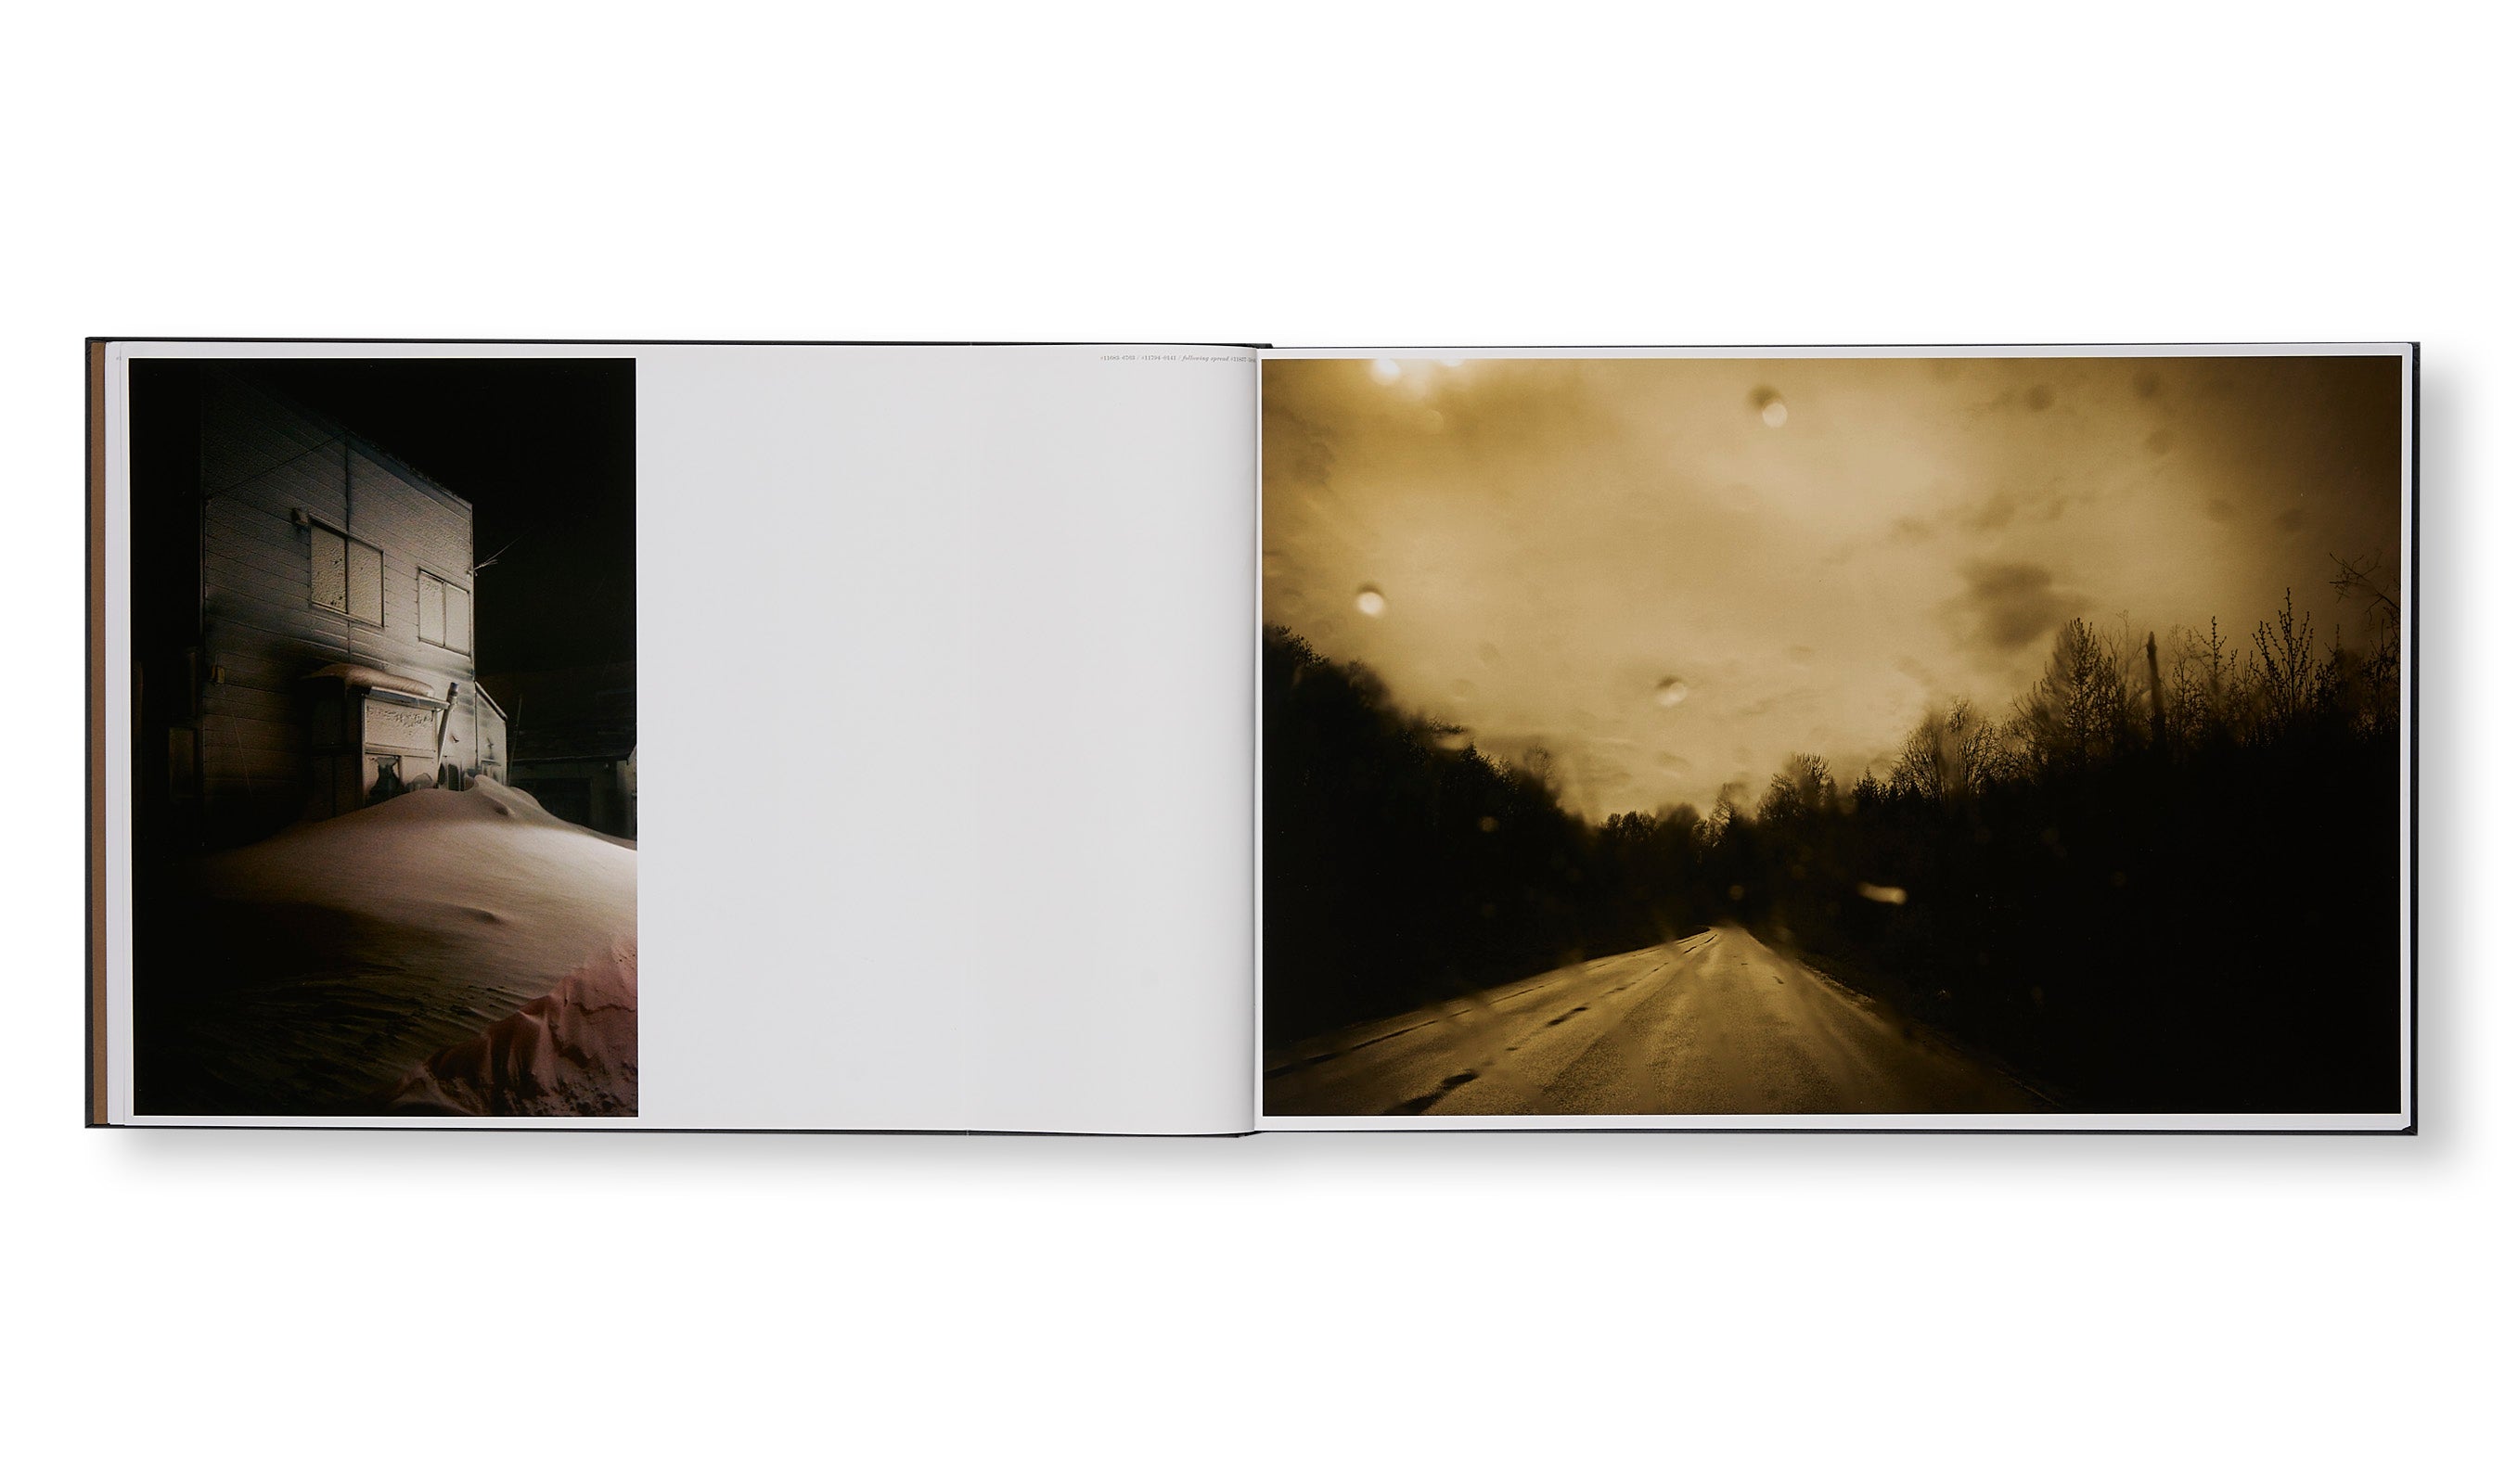 THE END SENDS ADVANCE WARNING by Todd Hido